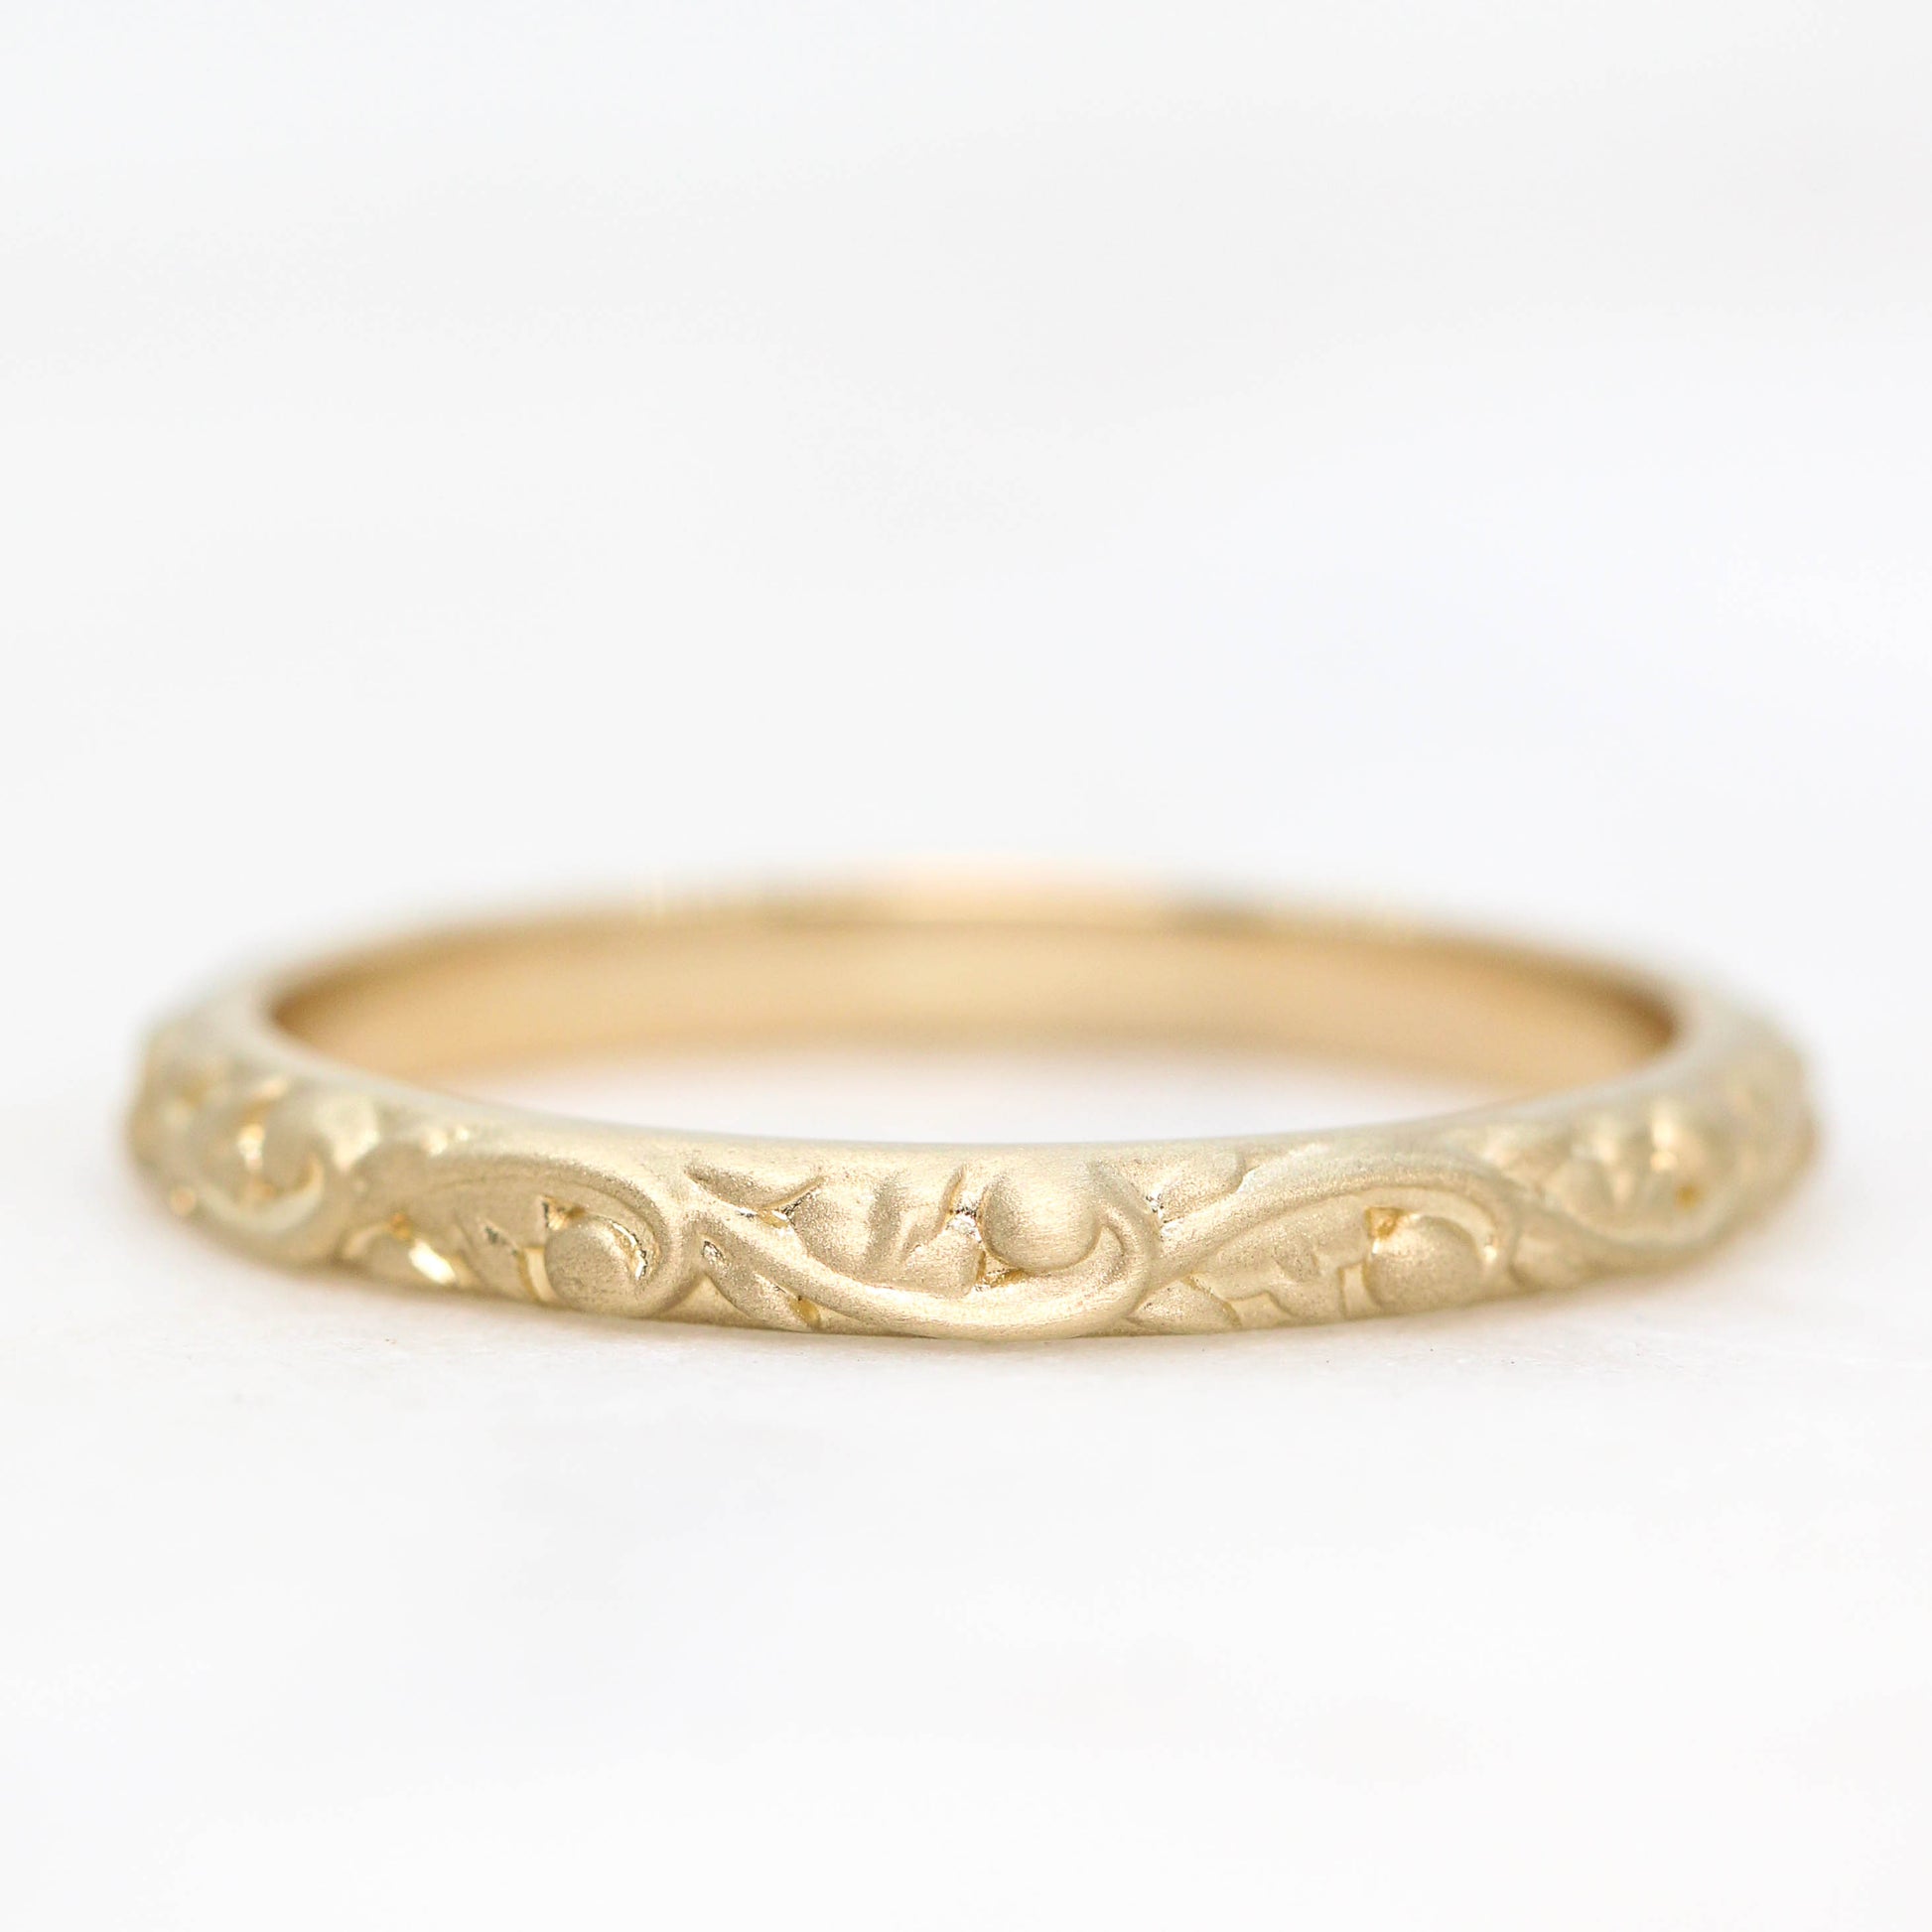 Bryce - Floral Vine Vintage Style Unisex Wedding Band in Your Choice of 14K Gold - Midwinter Co. Alternative Bridal Rings and Modern Fine Jewelry